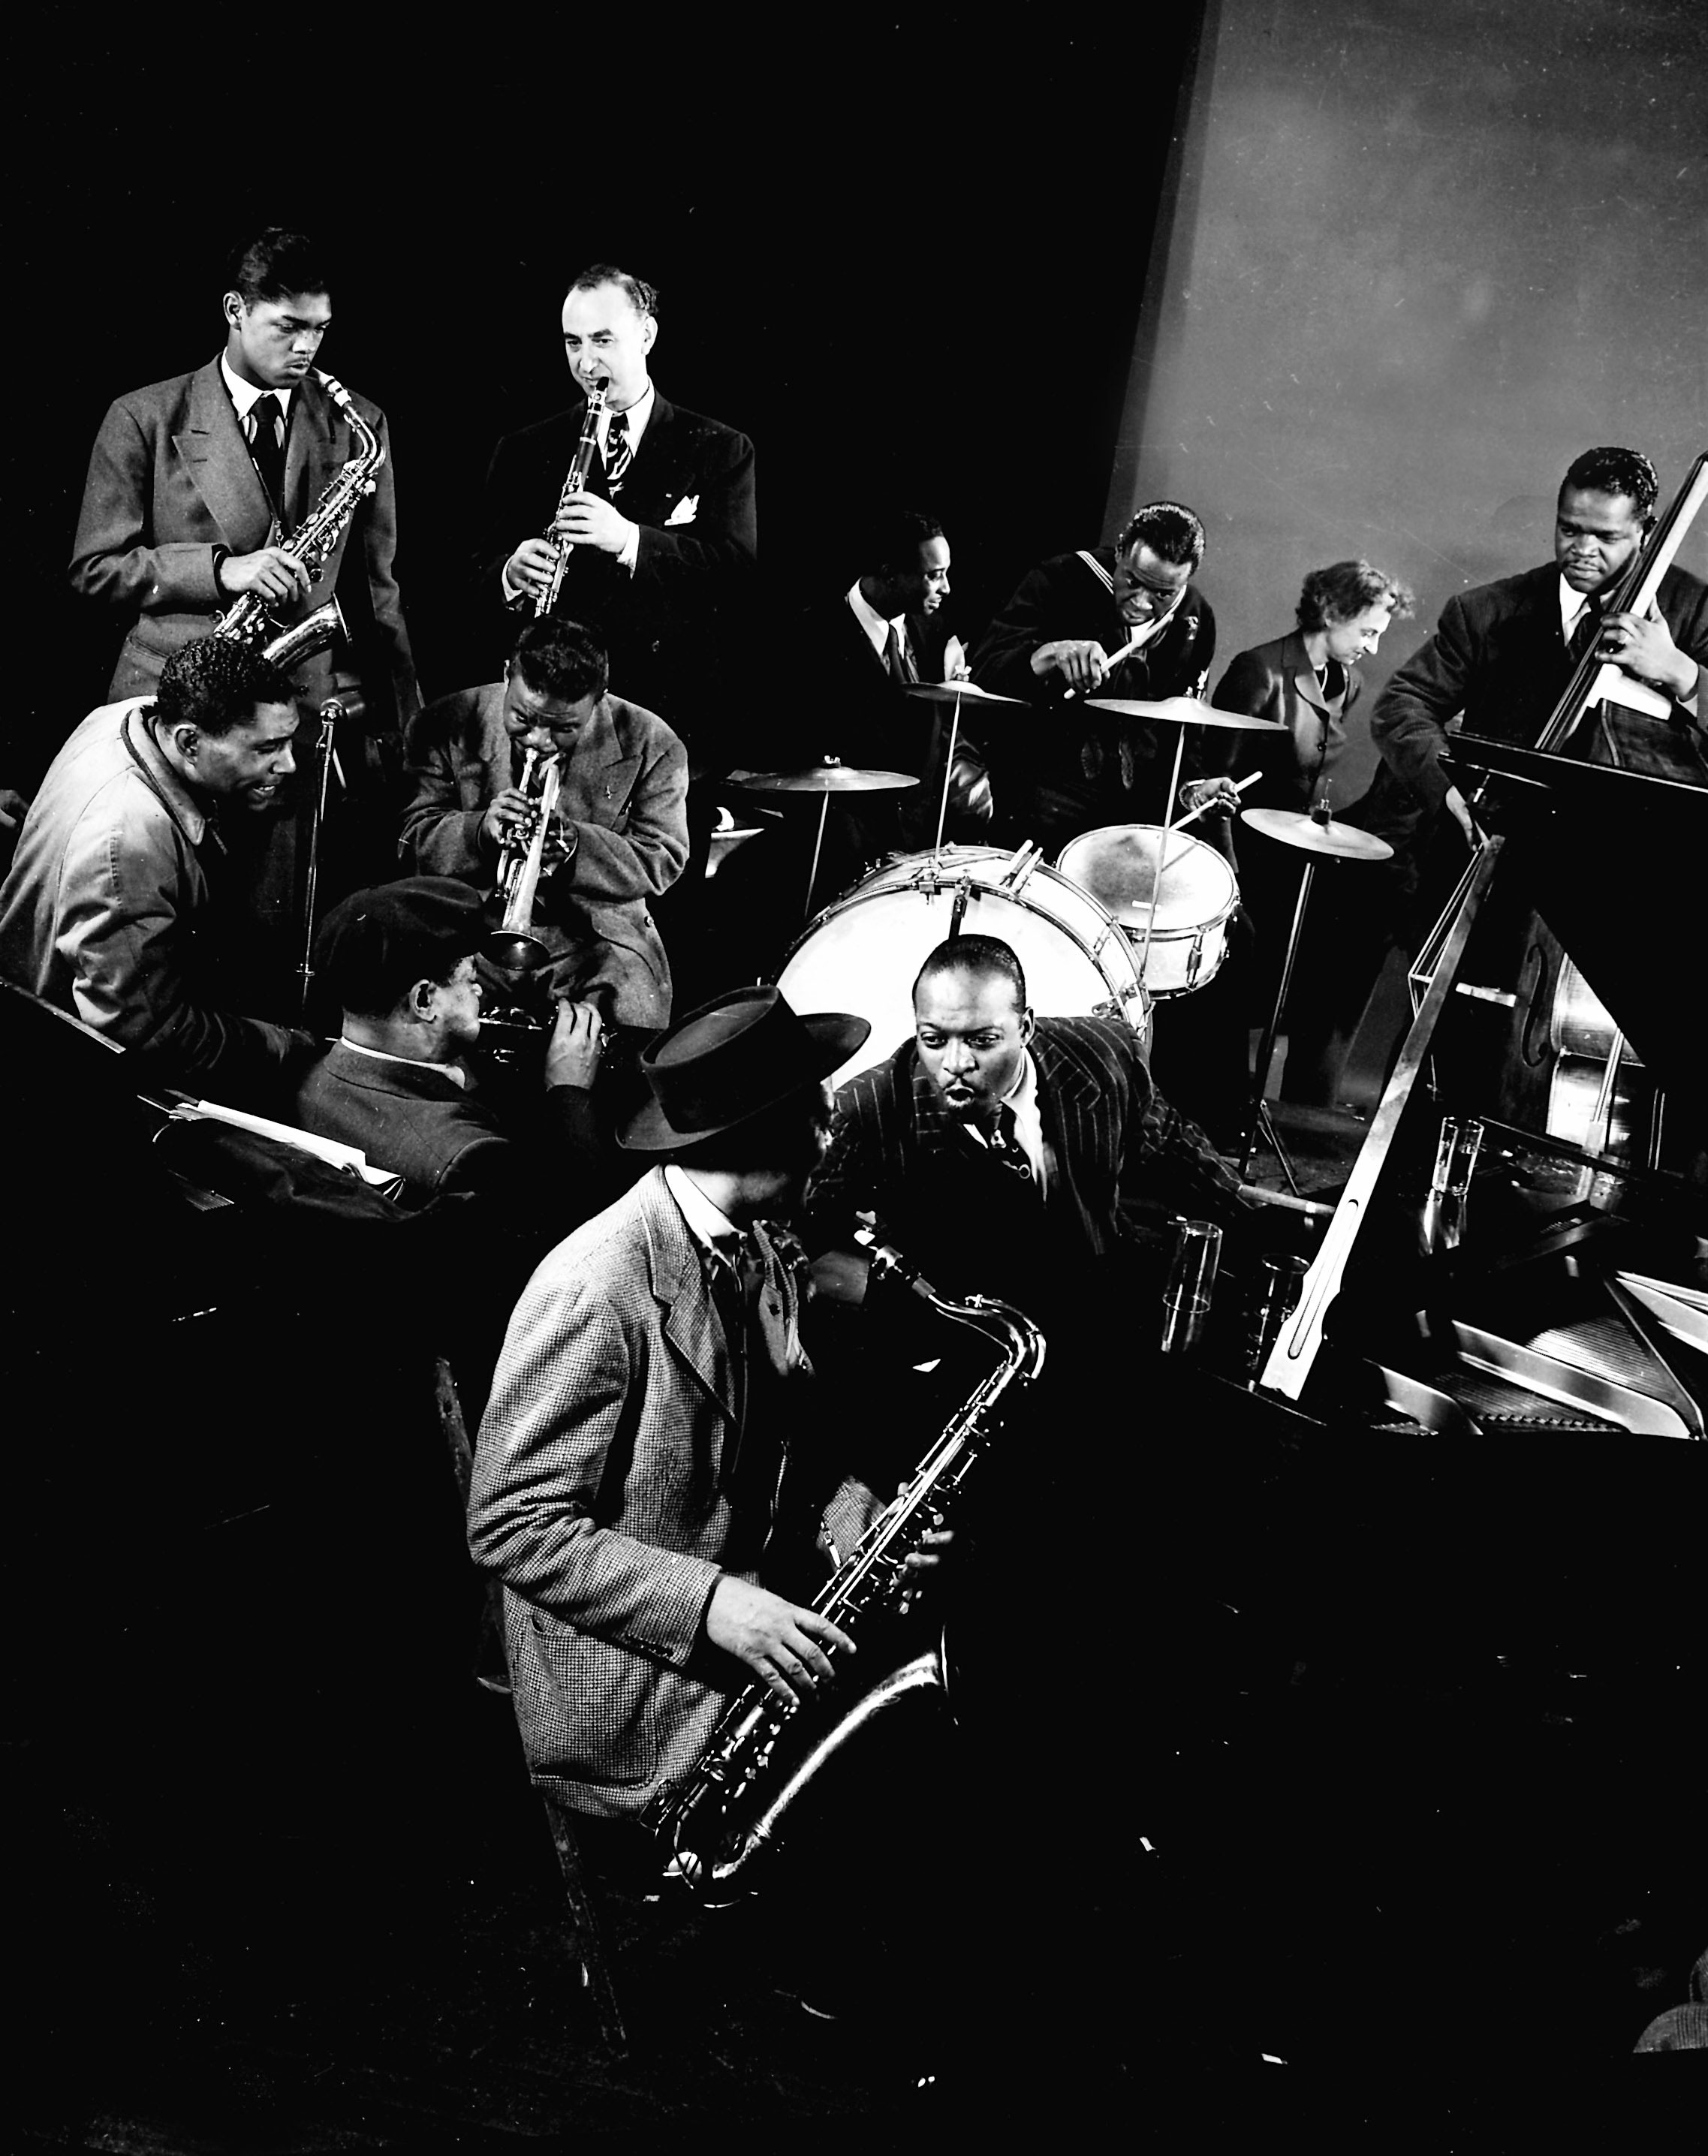 Count Basie, Lester Young, and other jazz greats at Gjon Mili's Studio in New York, 1943.